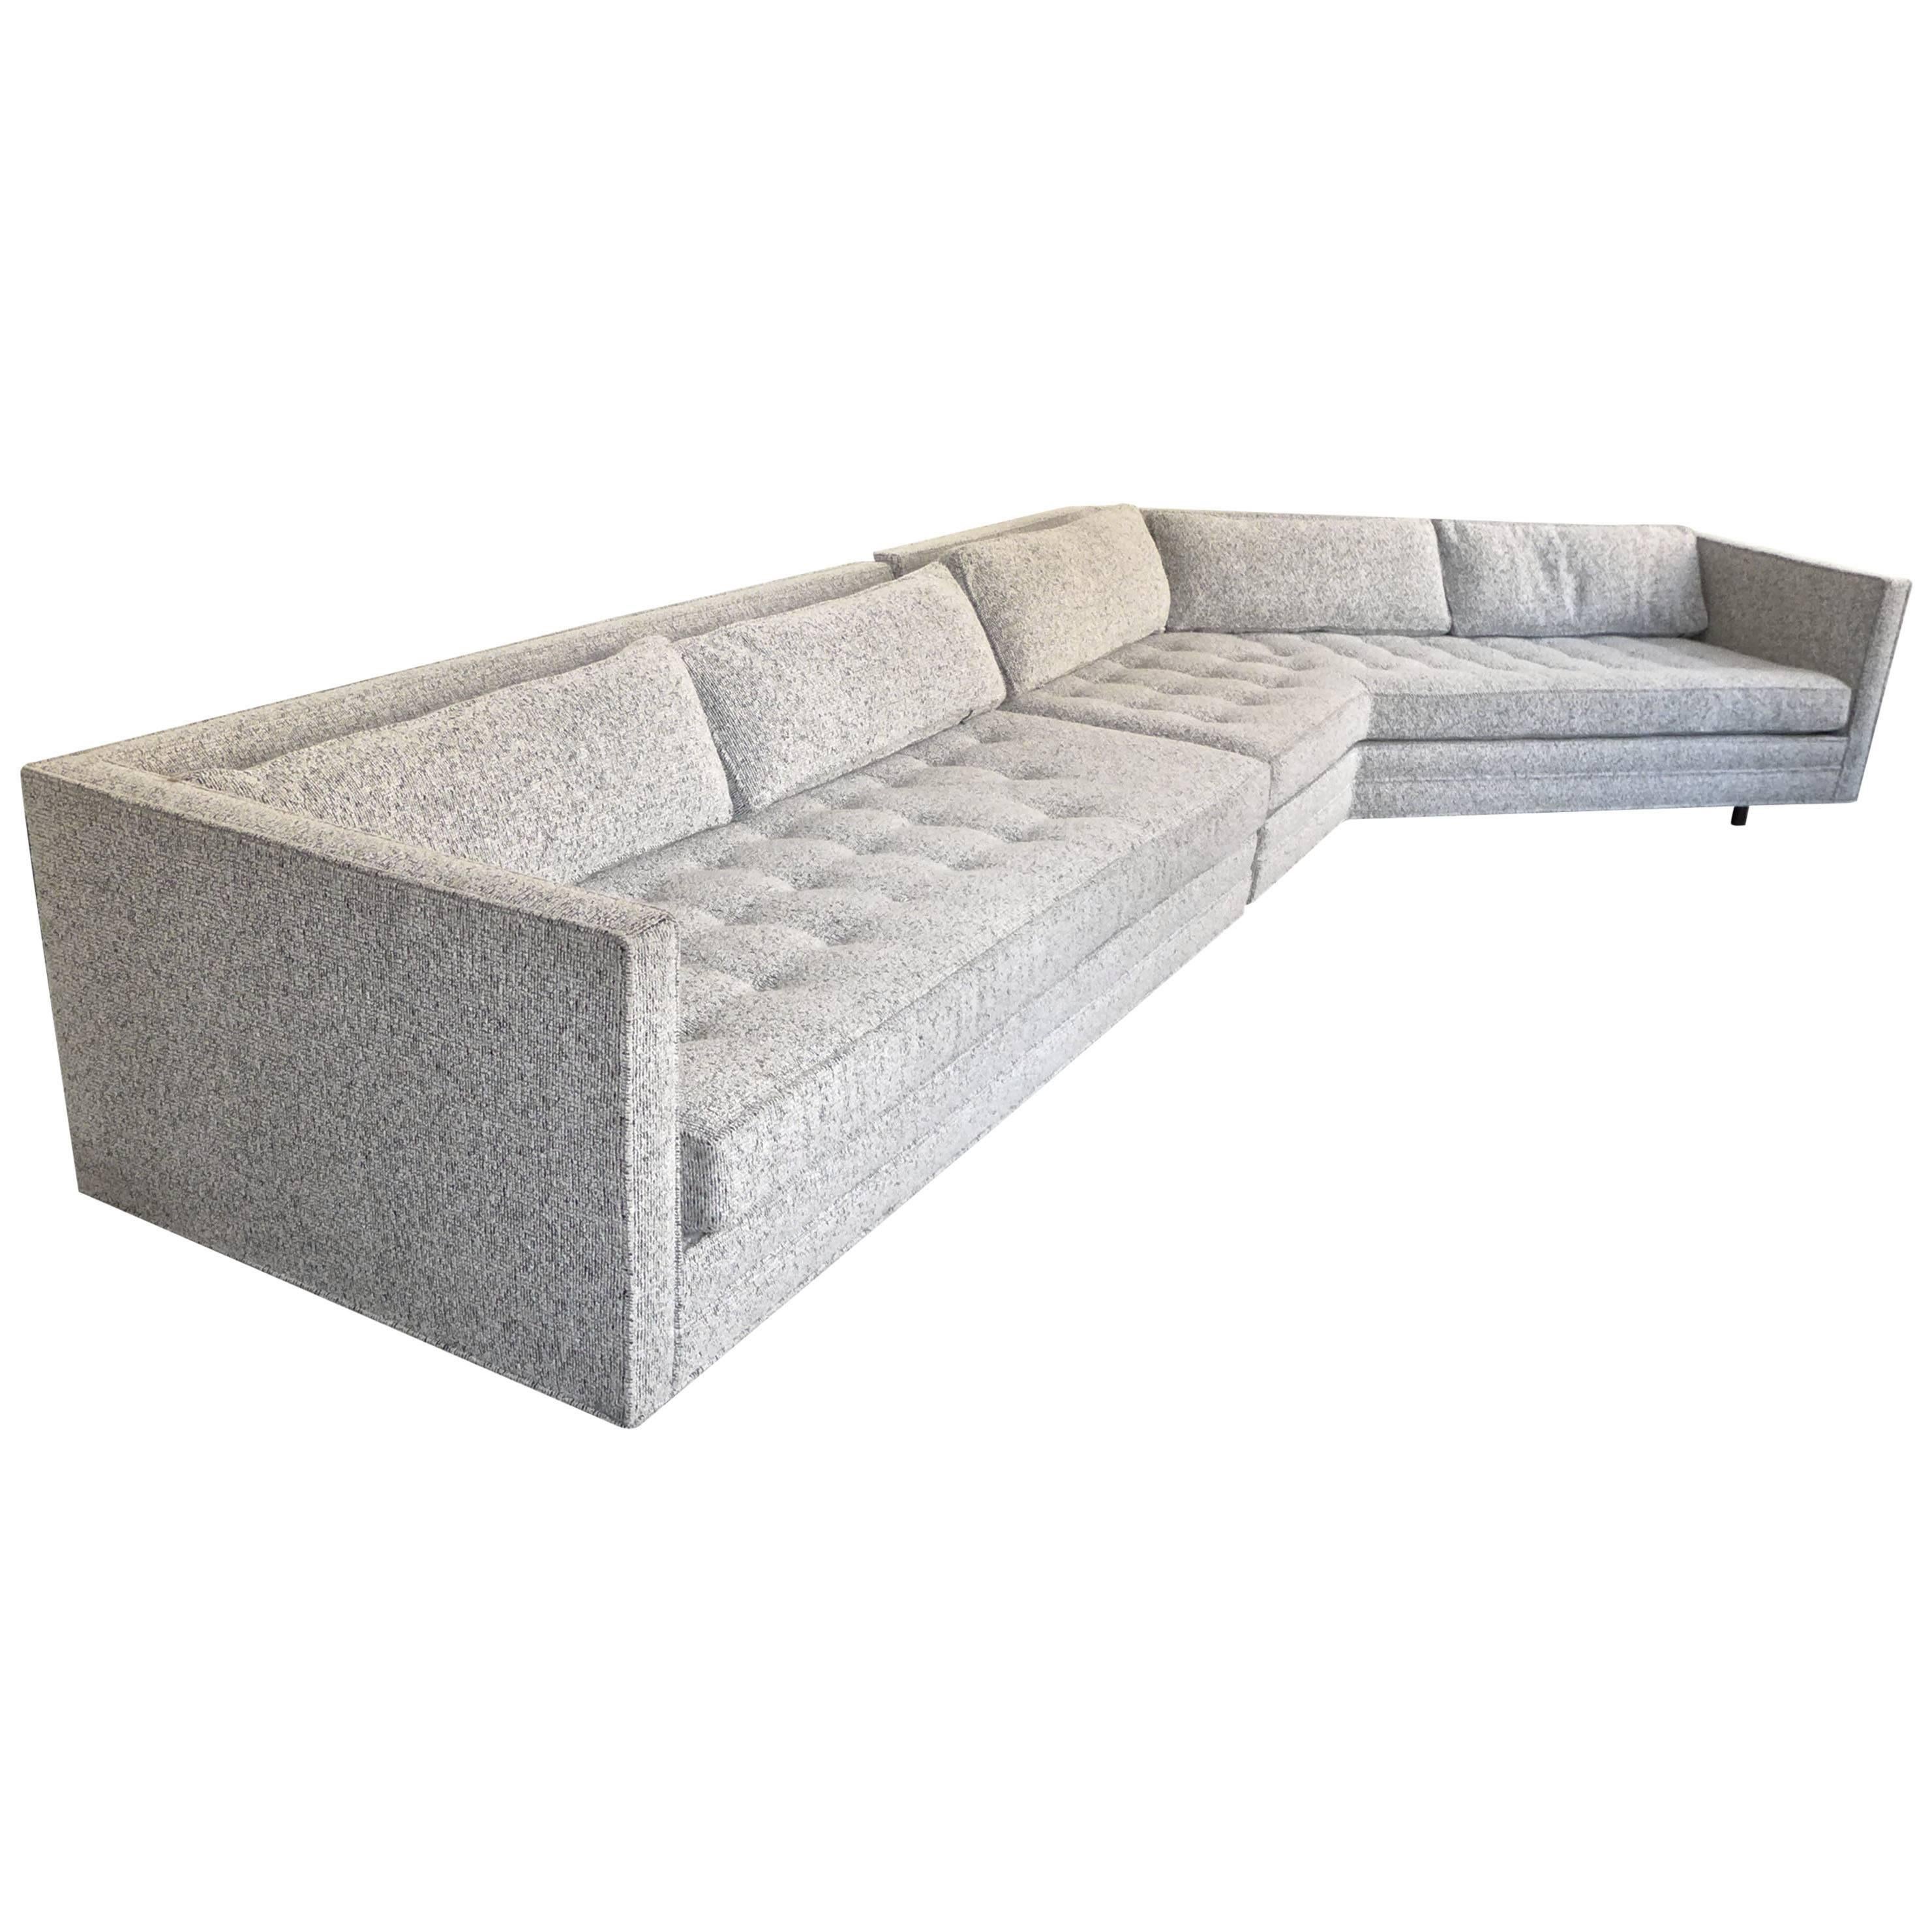 Two-piece sectional sofa with angled section and recessed mahogany cylindrical legs. Designed by Harvey Probber and made circa 1960s. With even arms, tufted seat cushions and five loose cushions on the back. A well-tailored, nicely proportioned and